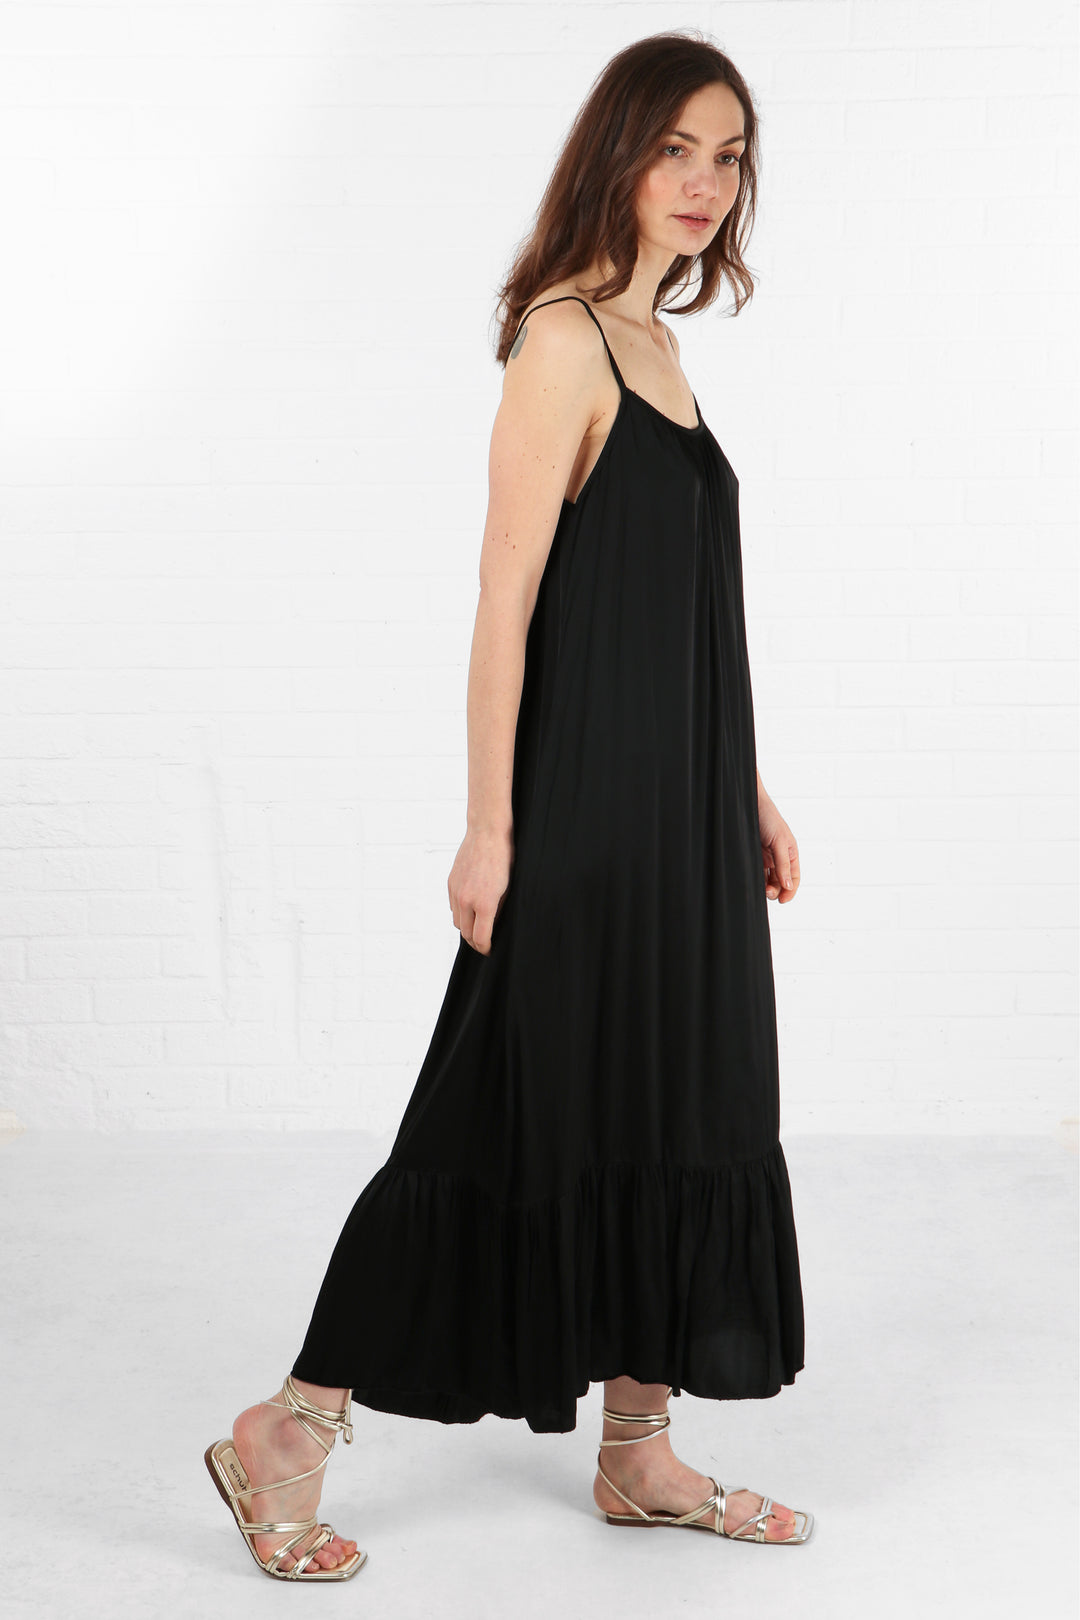 model wearing a black tiered maxi dress with thin spaghetti staps